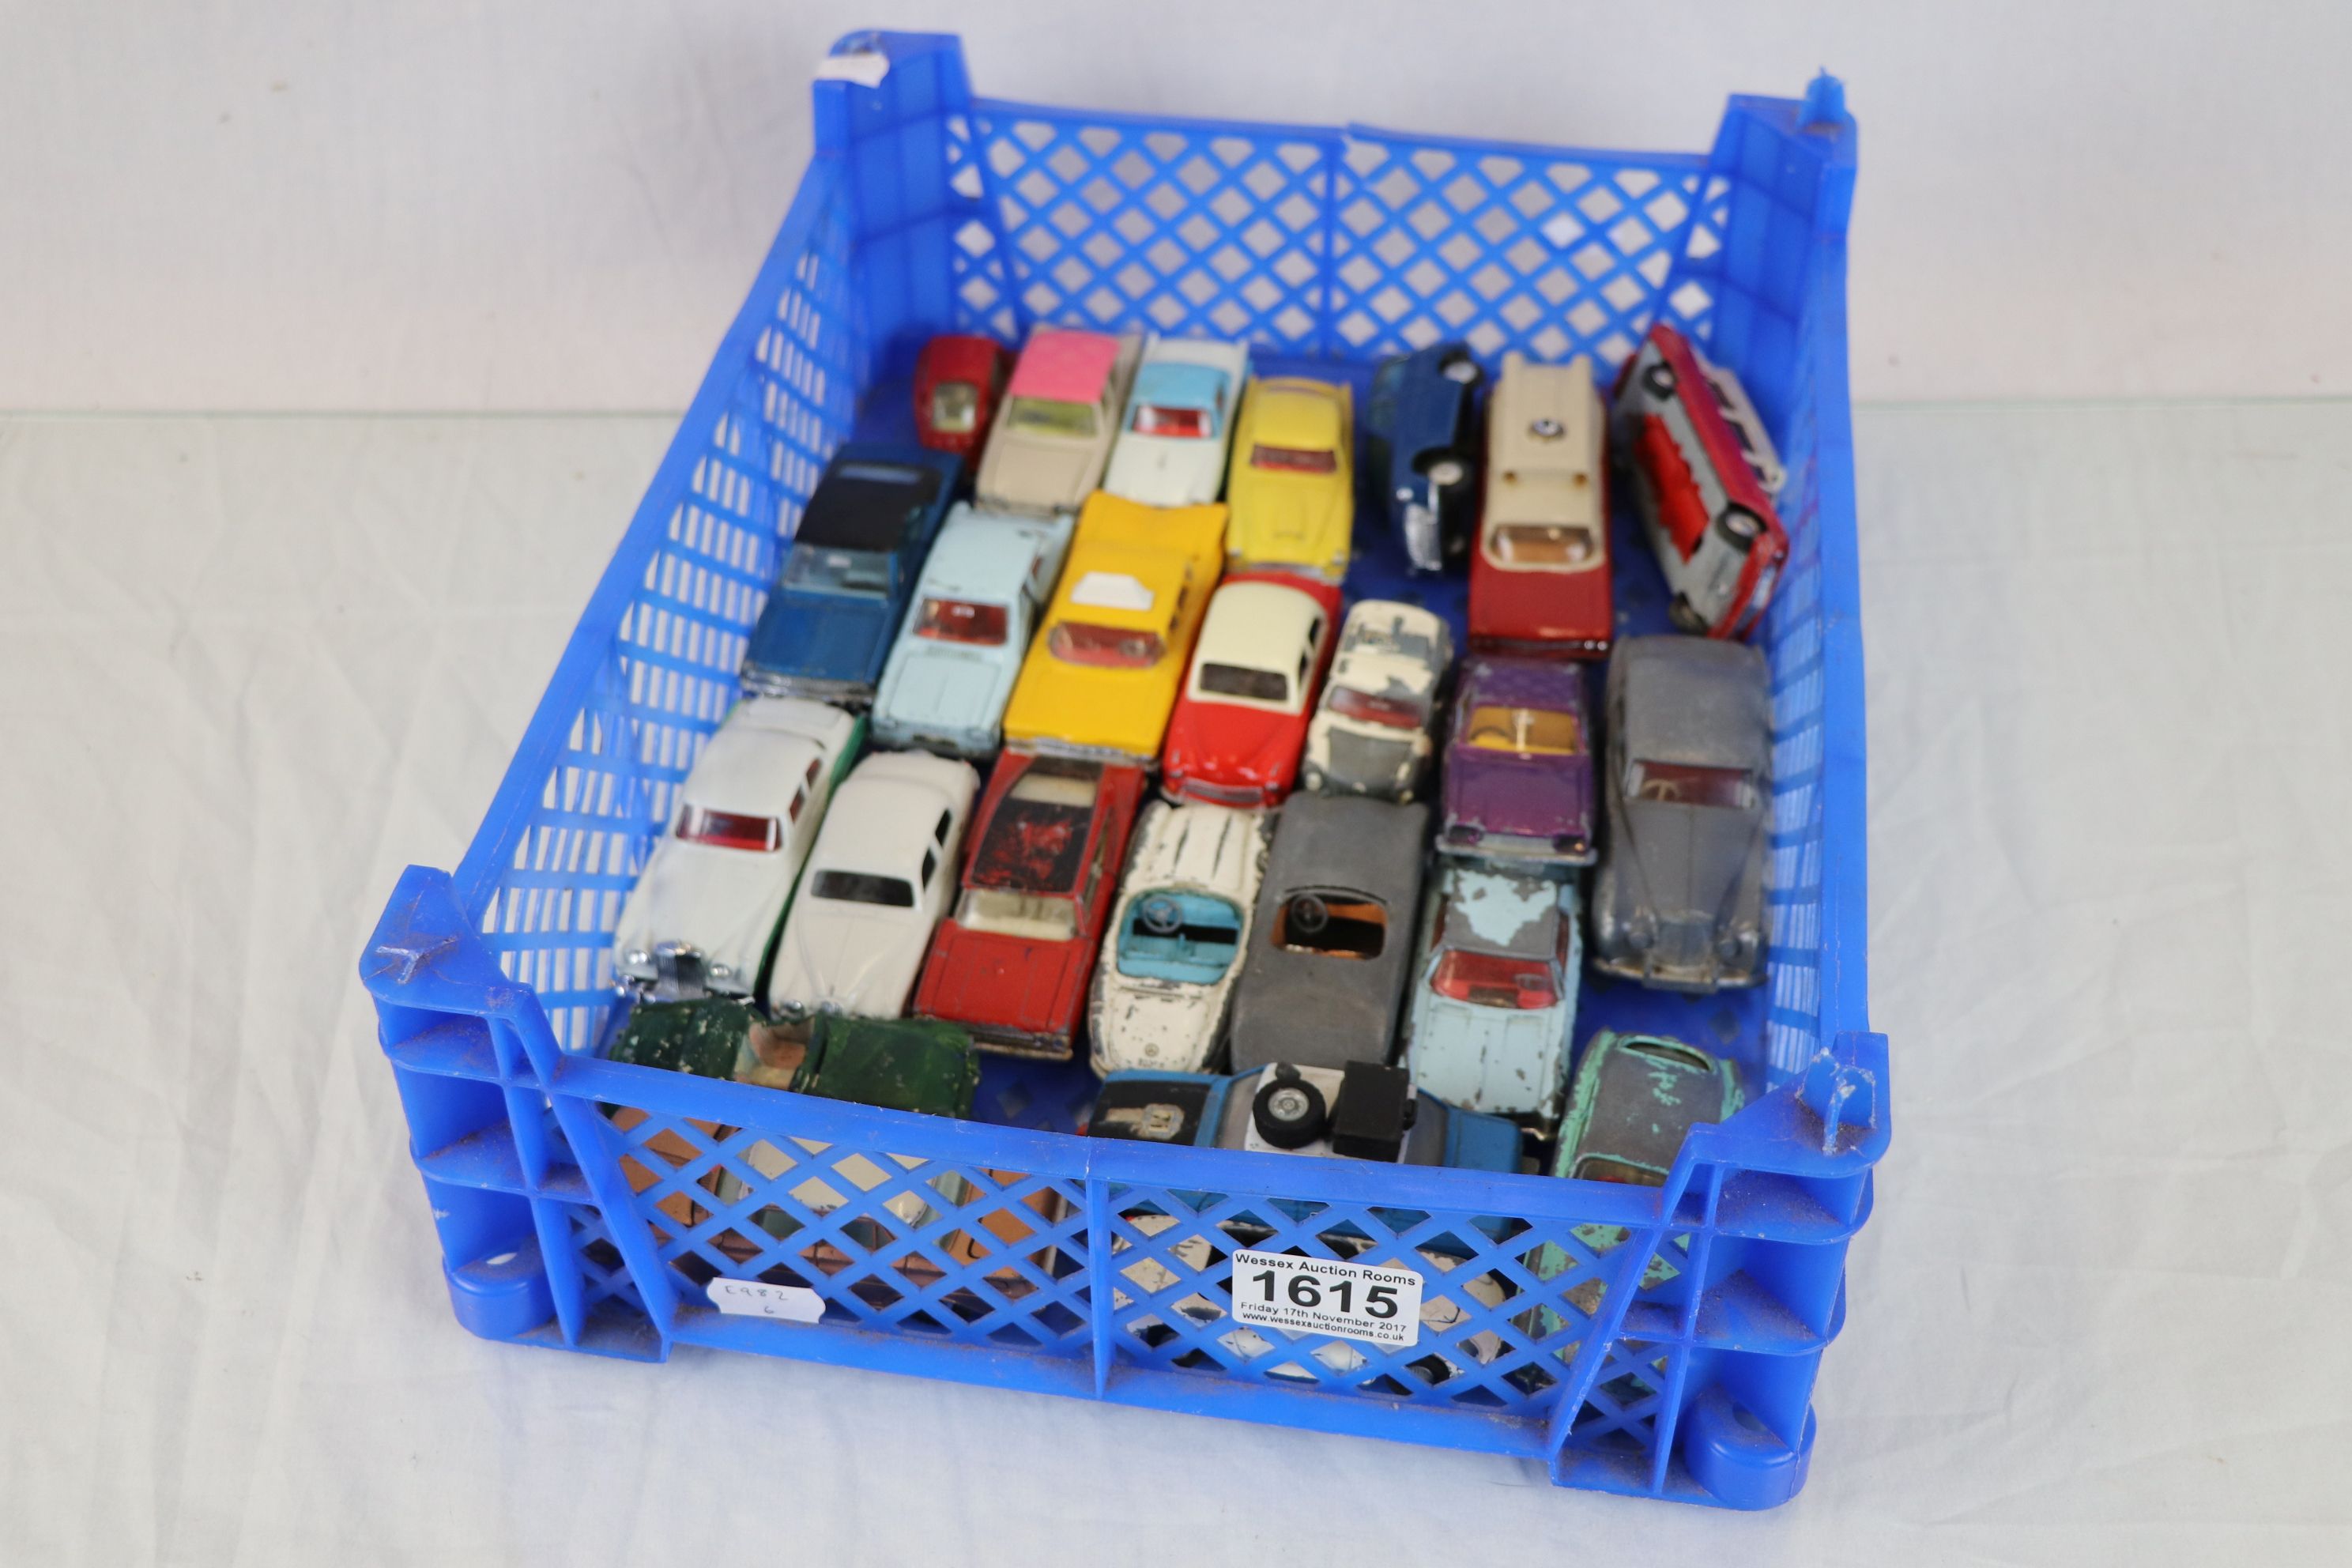 Collection of vintage Corgi & Dinky diecast model vehicles, play worn with the odd repaint, includes